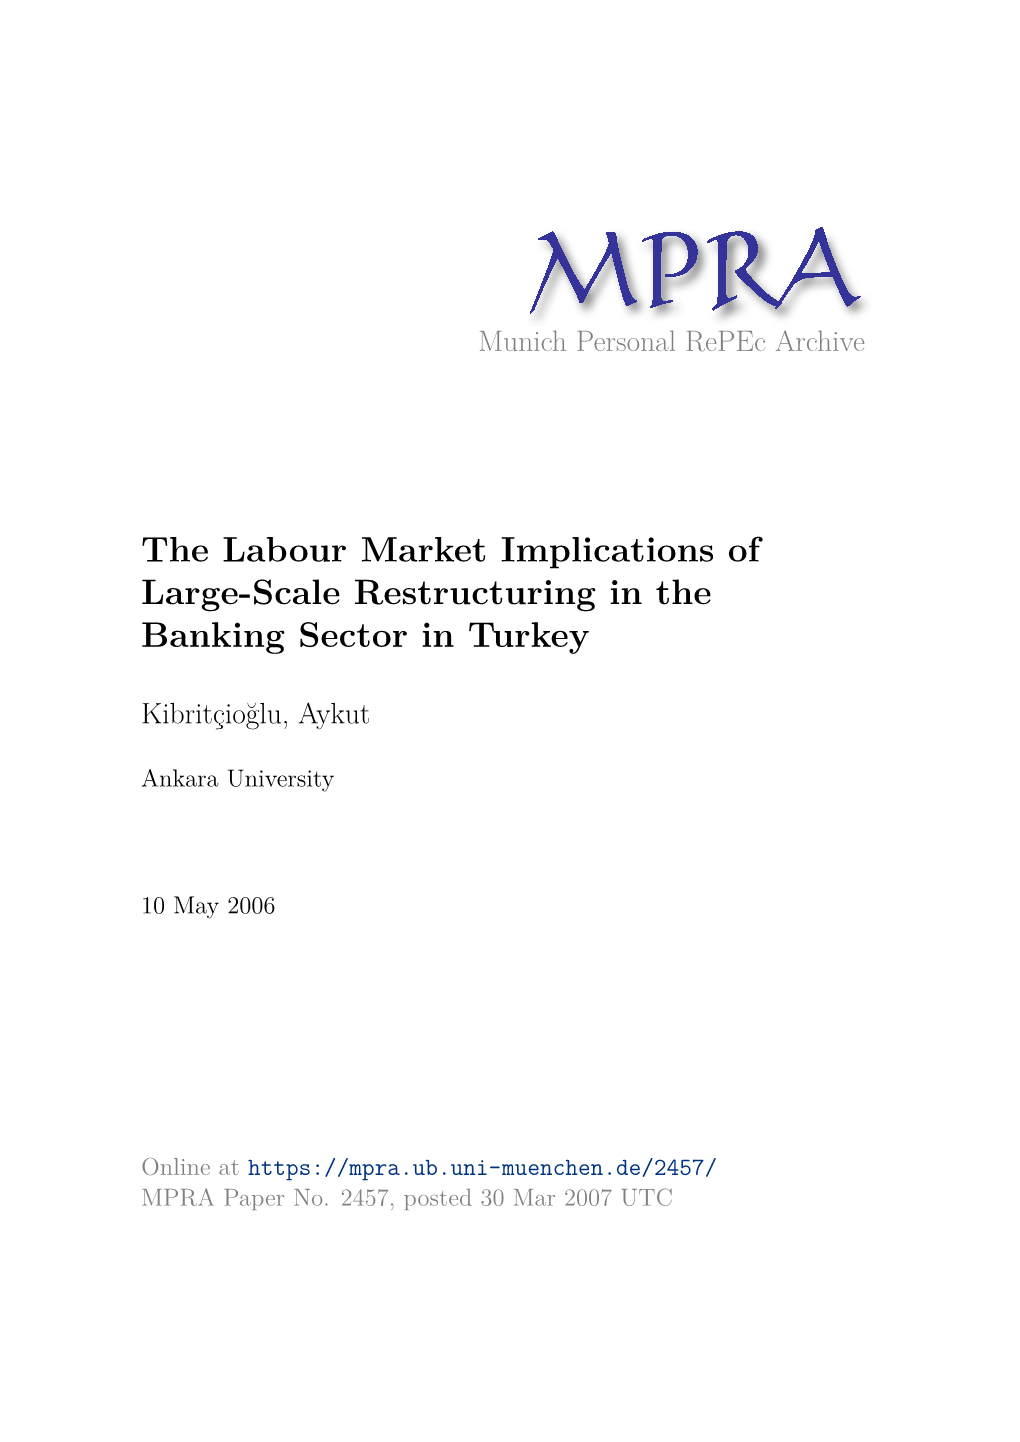 The Labor Market Implications of Restructuring in the Banking Sector